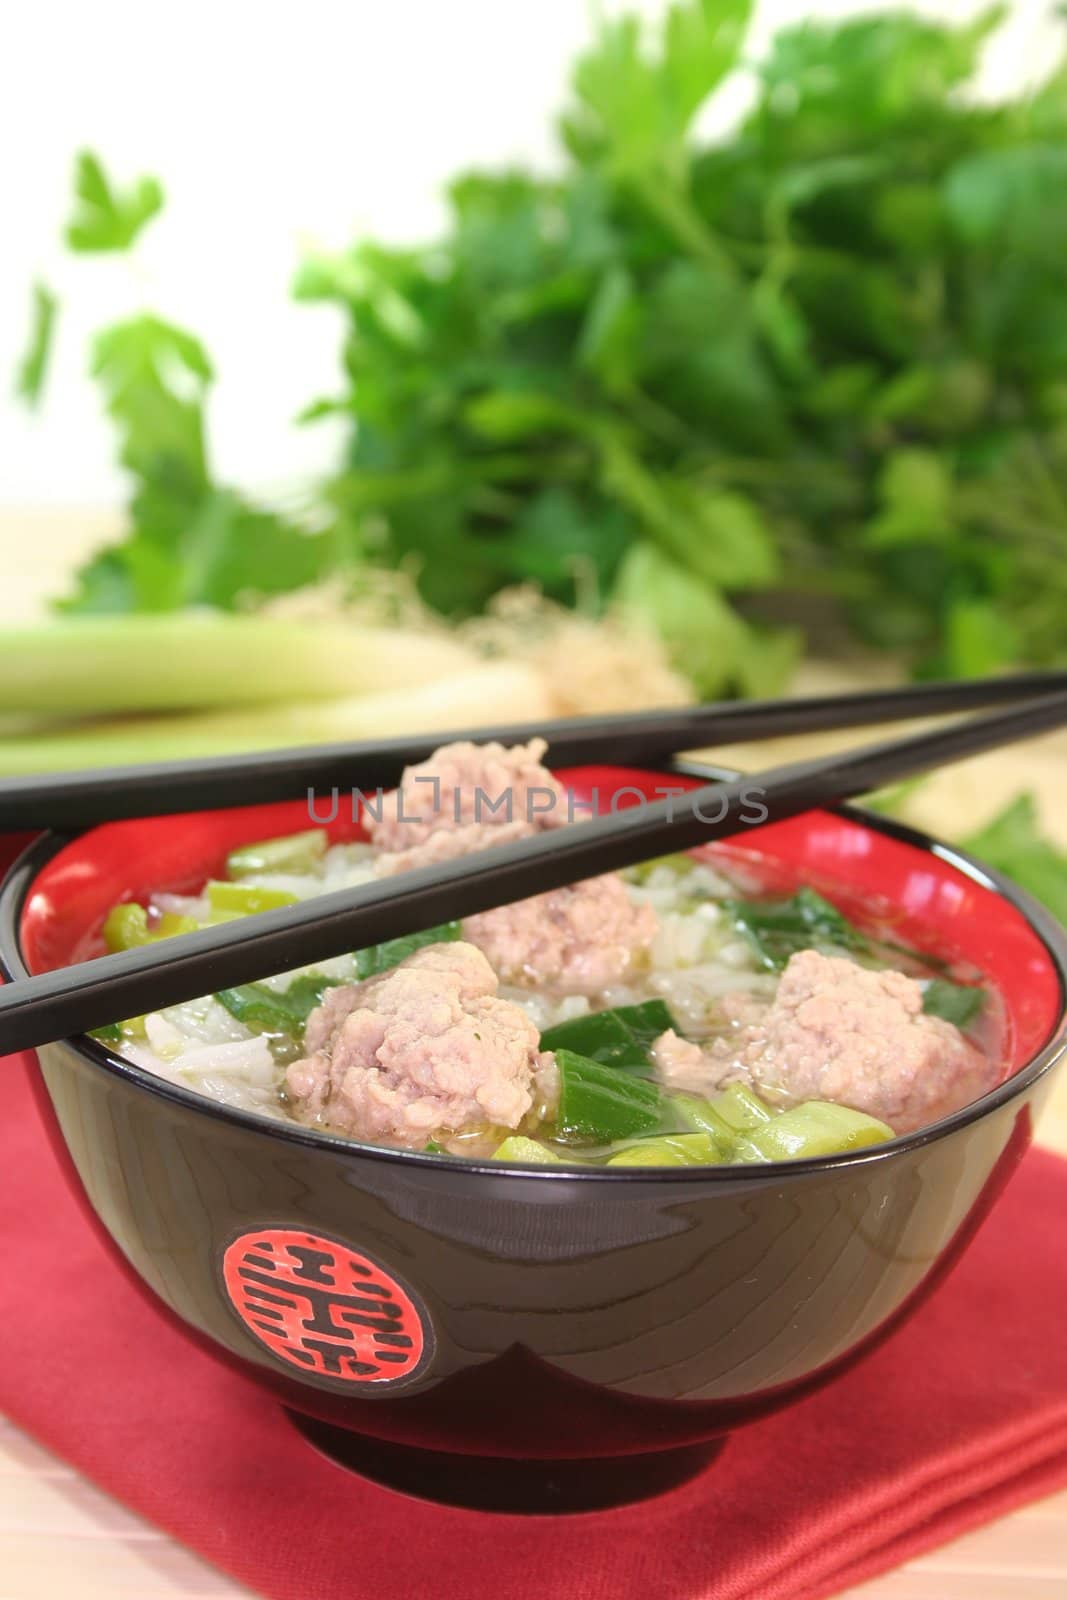 Thai rice soup with meat balls, rice and spring onions